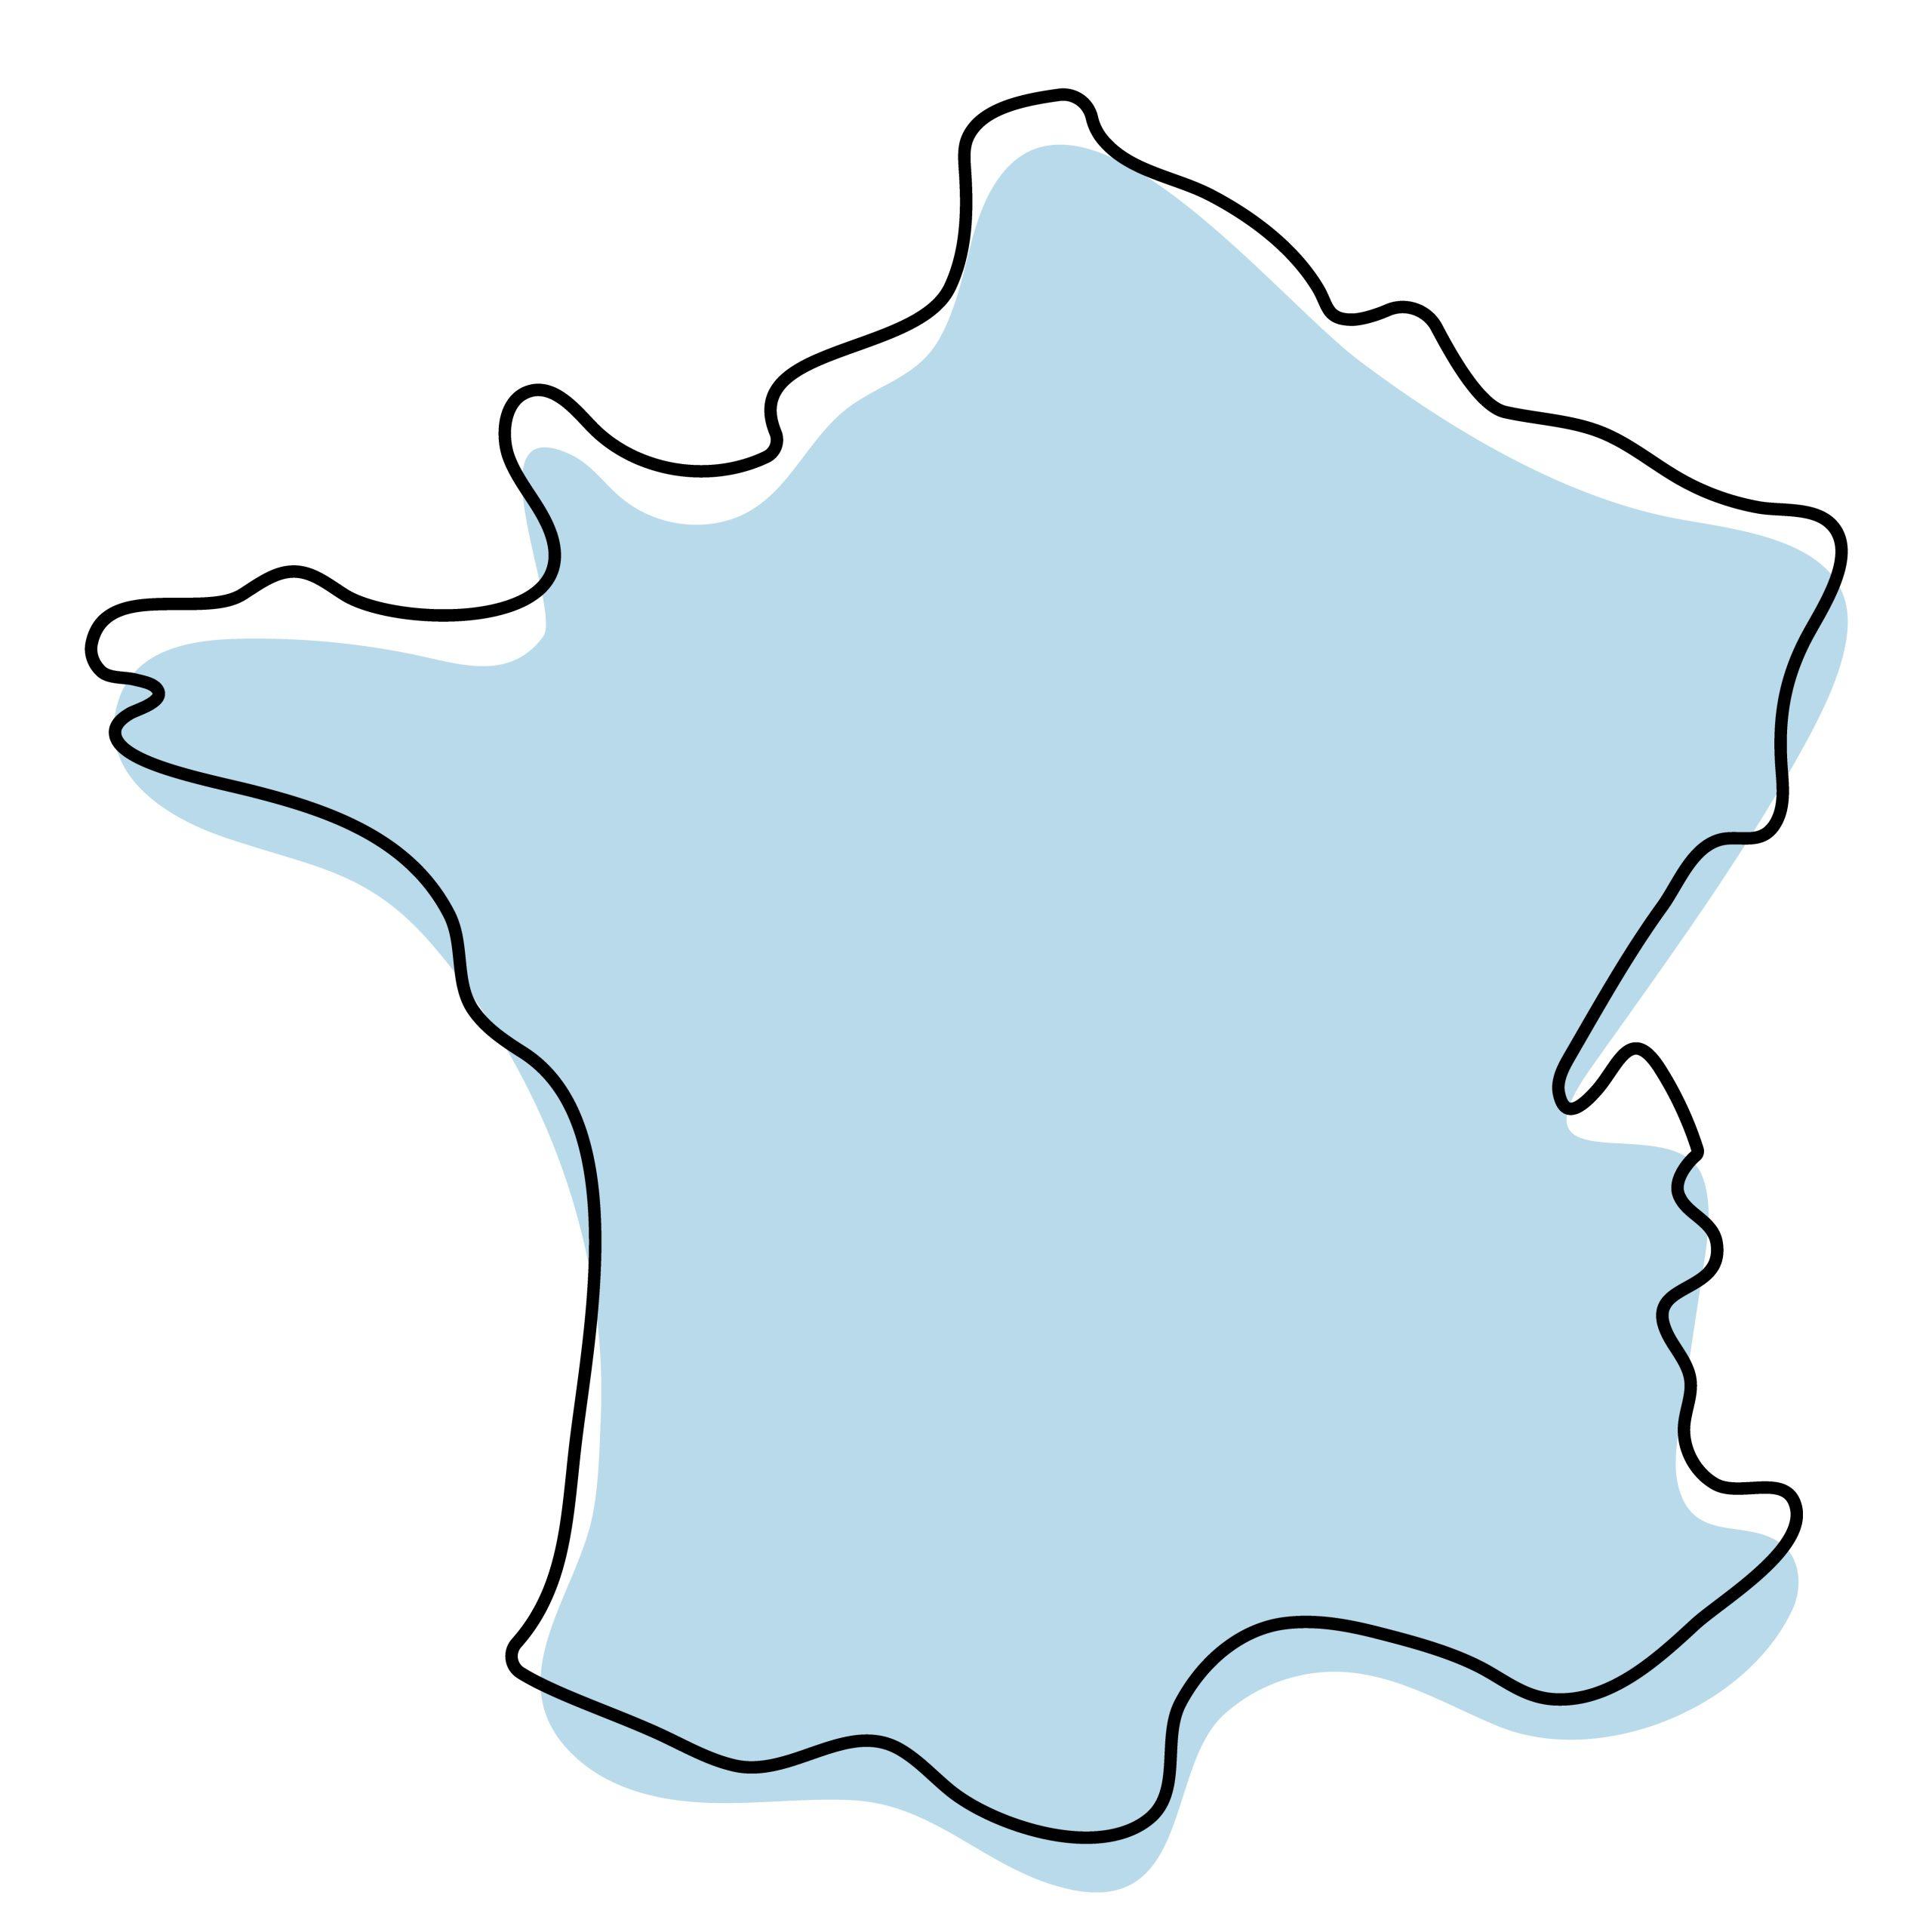 Stylized simple outline map of France icon. Blue sketch map of France vector illustration